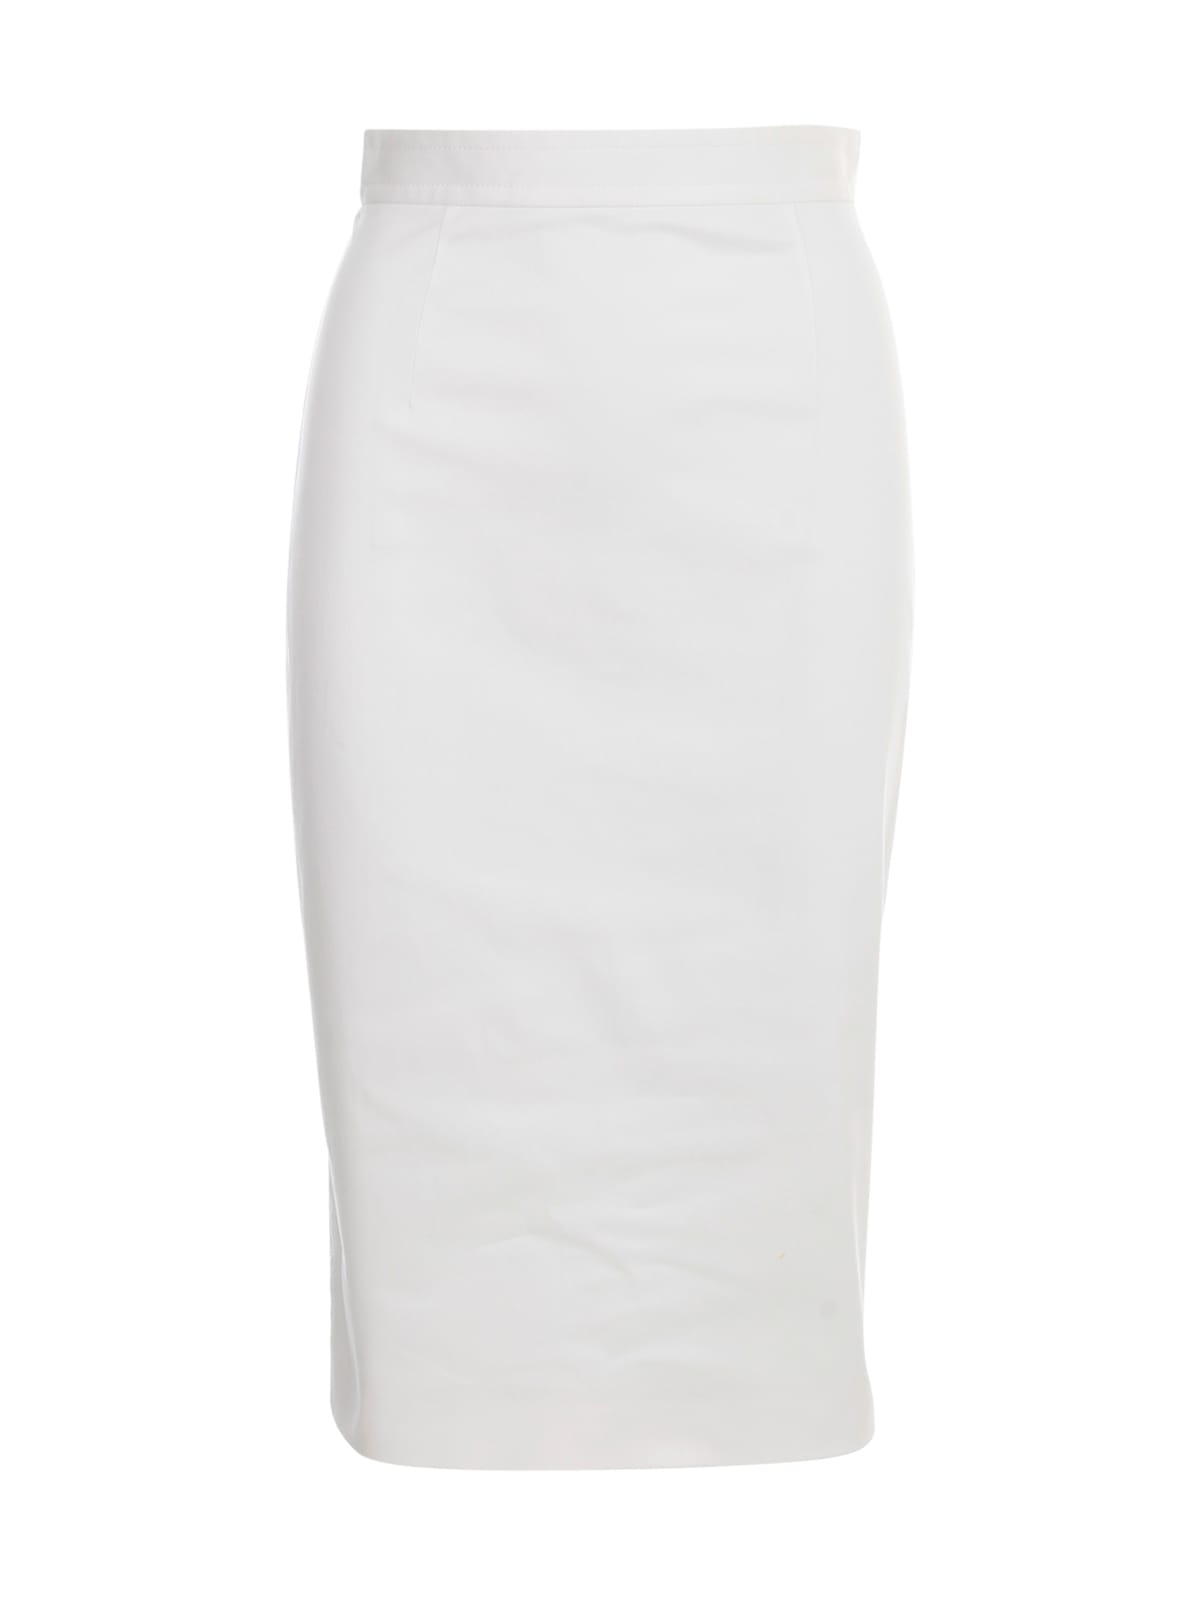 Dsquared2 High Waisted Pencil Skirt